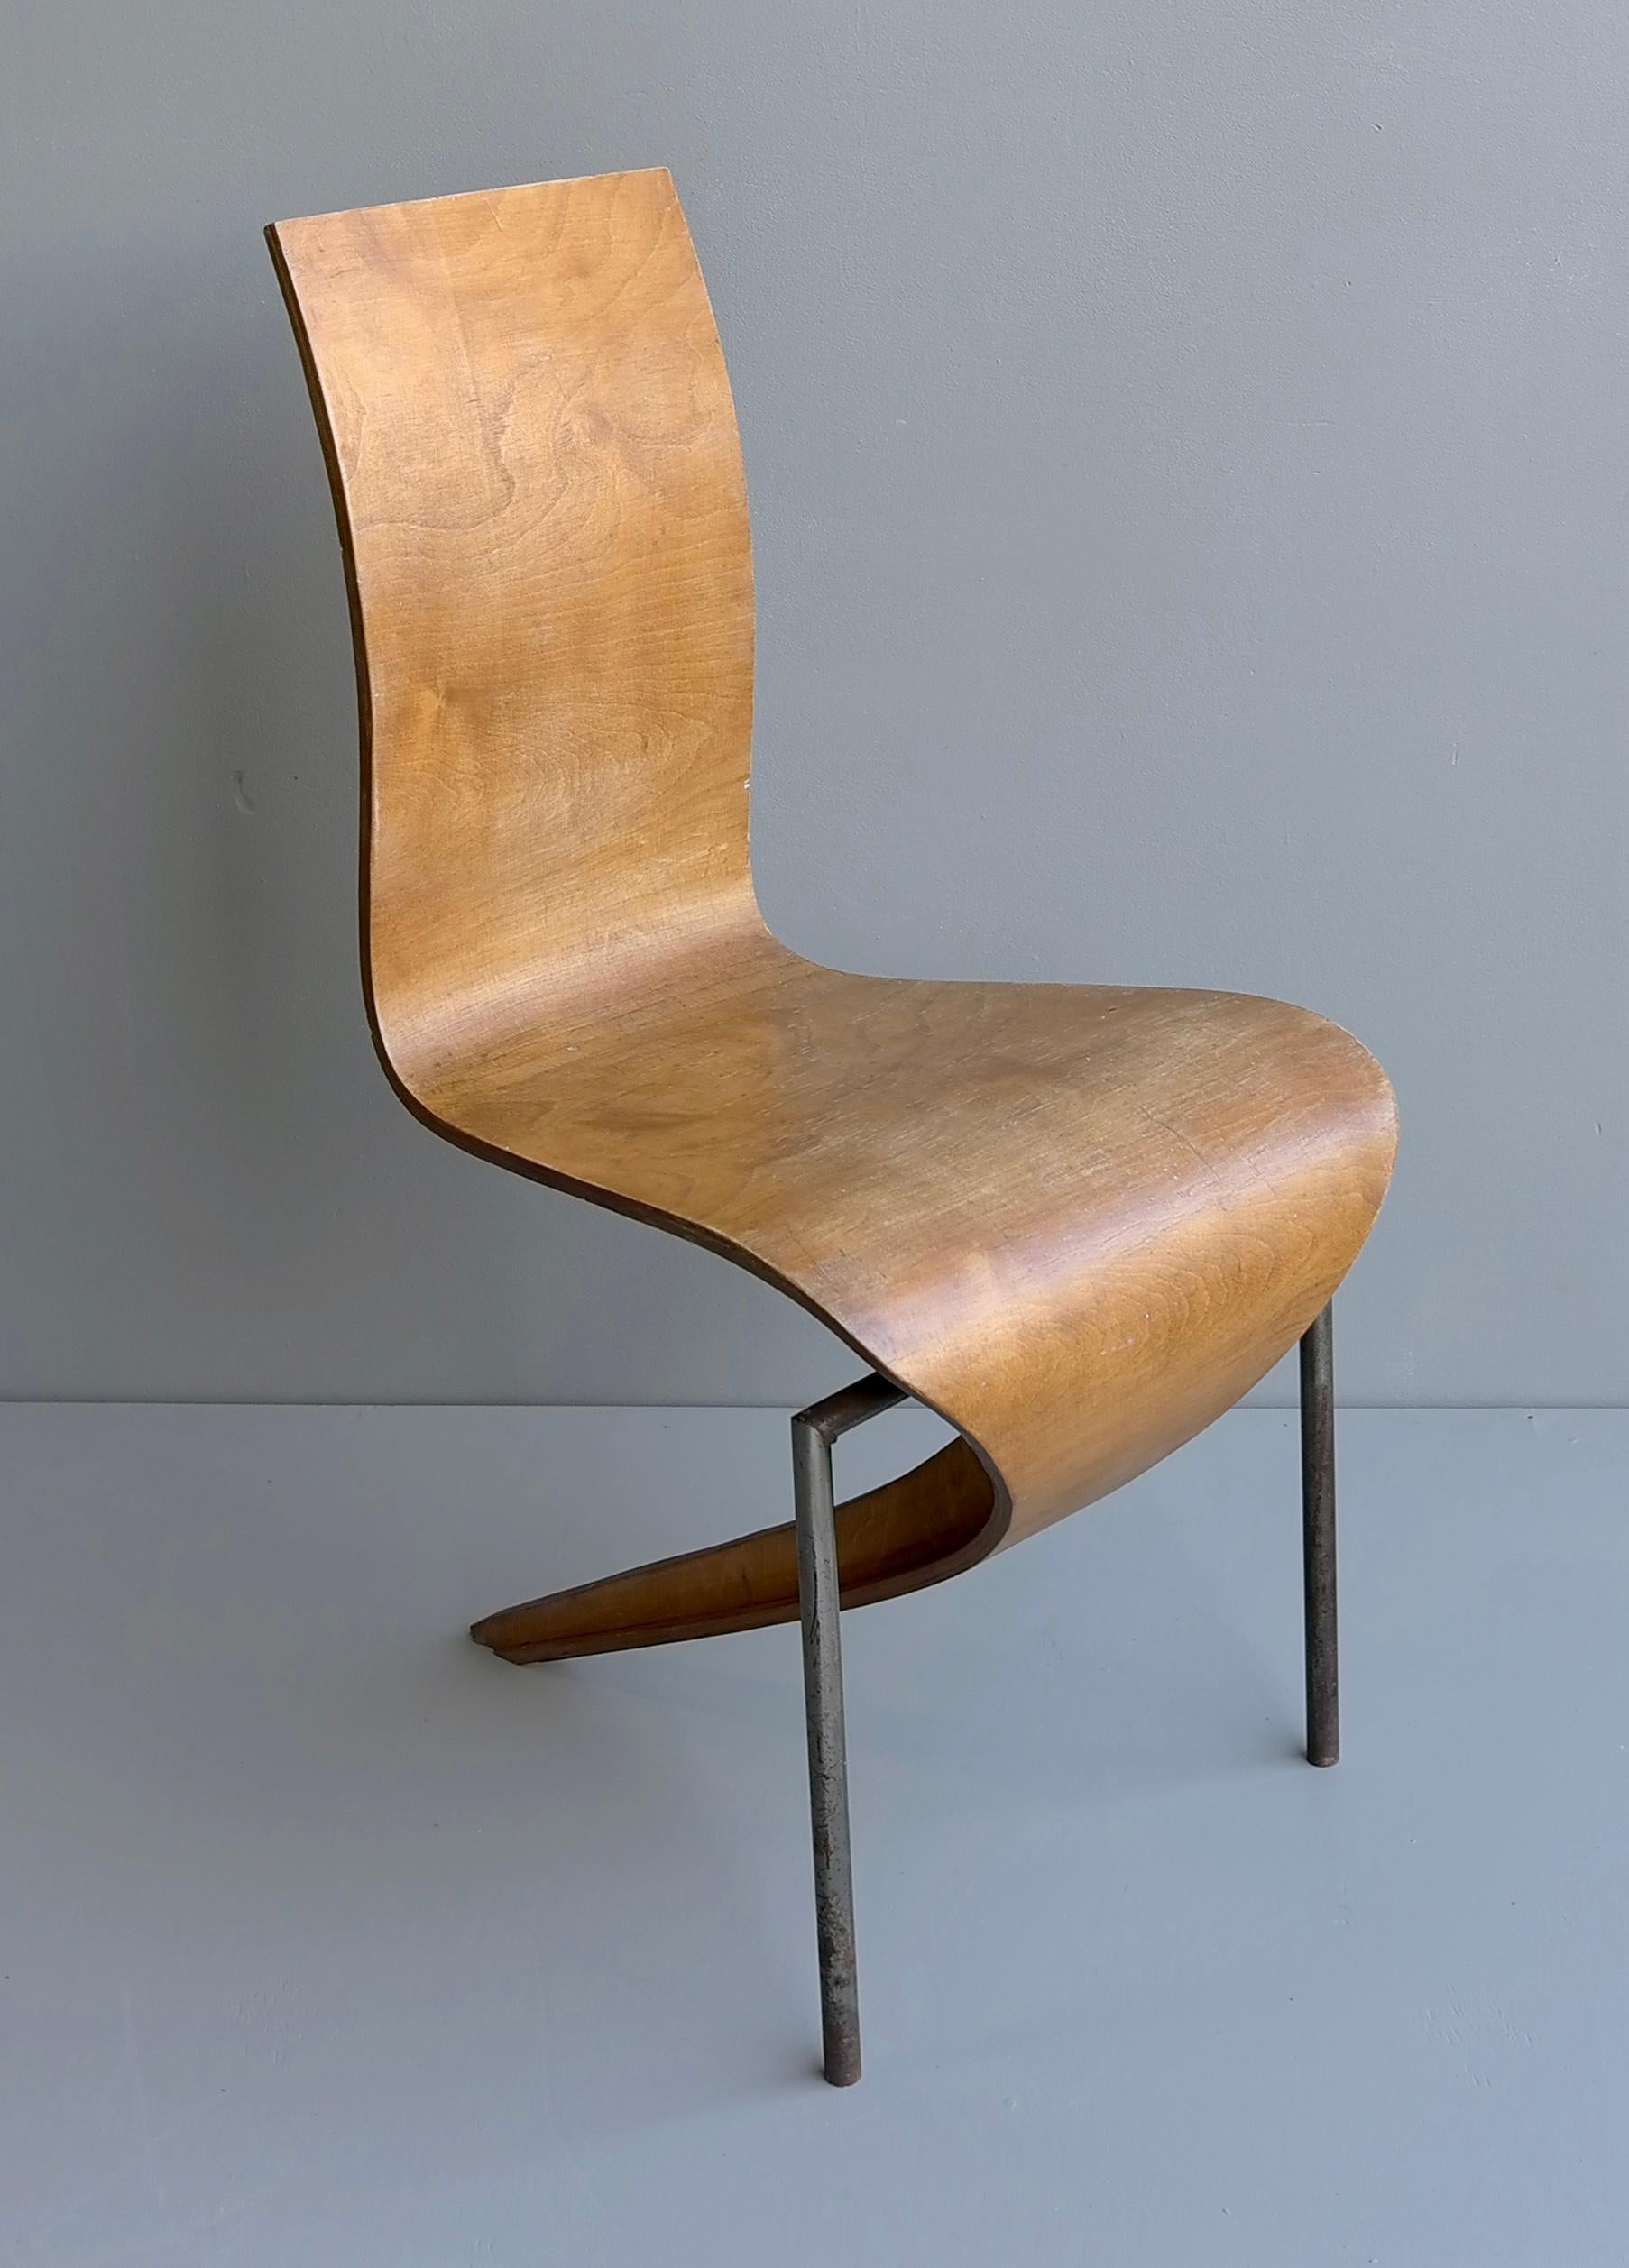 Steel Sculptural Mid-Century Modern French Side Chair, in Style of André Bloc For Sale